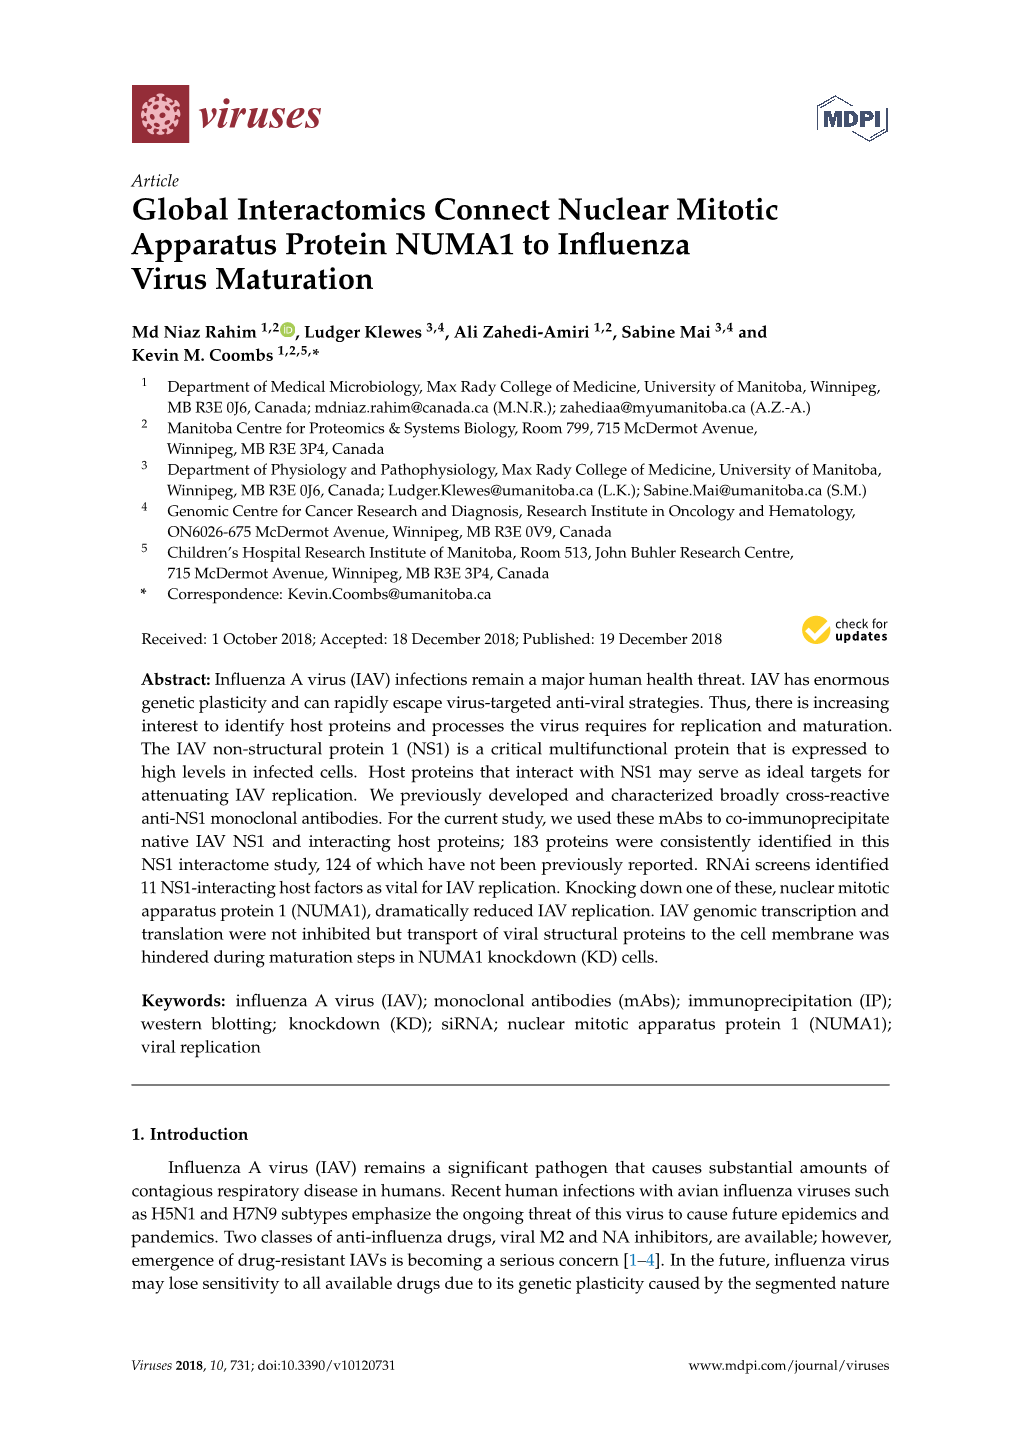 Global Interactomics Connect Nuclear Mitotic Apparatus Protein NUMA1 to Inﬂuenza Virus Maturation